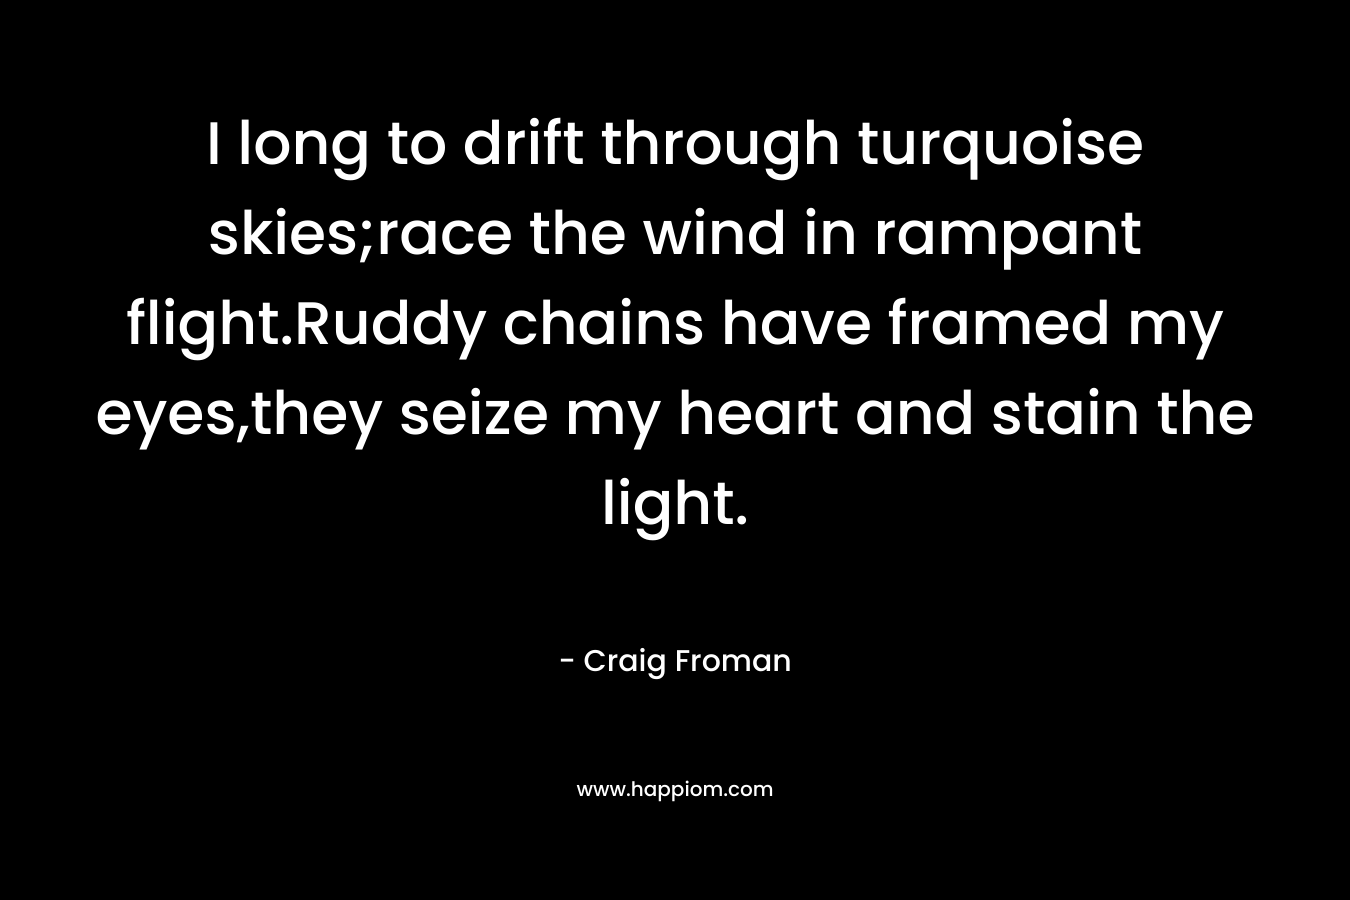 I long to drift through turquoise skies;race the wind in rampant flight.Ruddy chains have framed my eyes,they seize my heart and stain the light. – Craig Froman